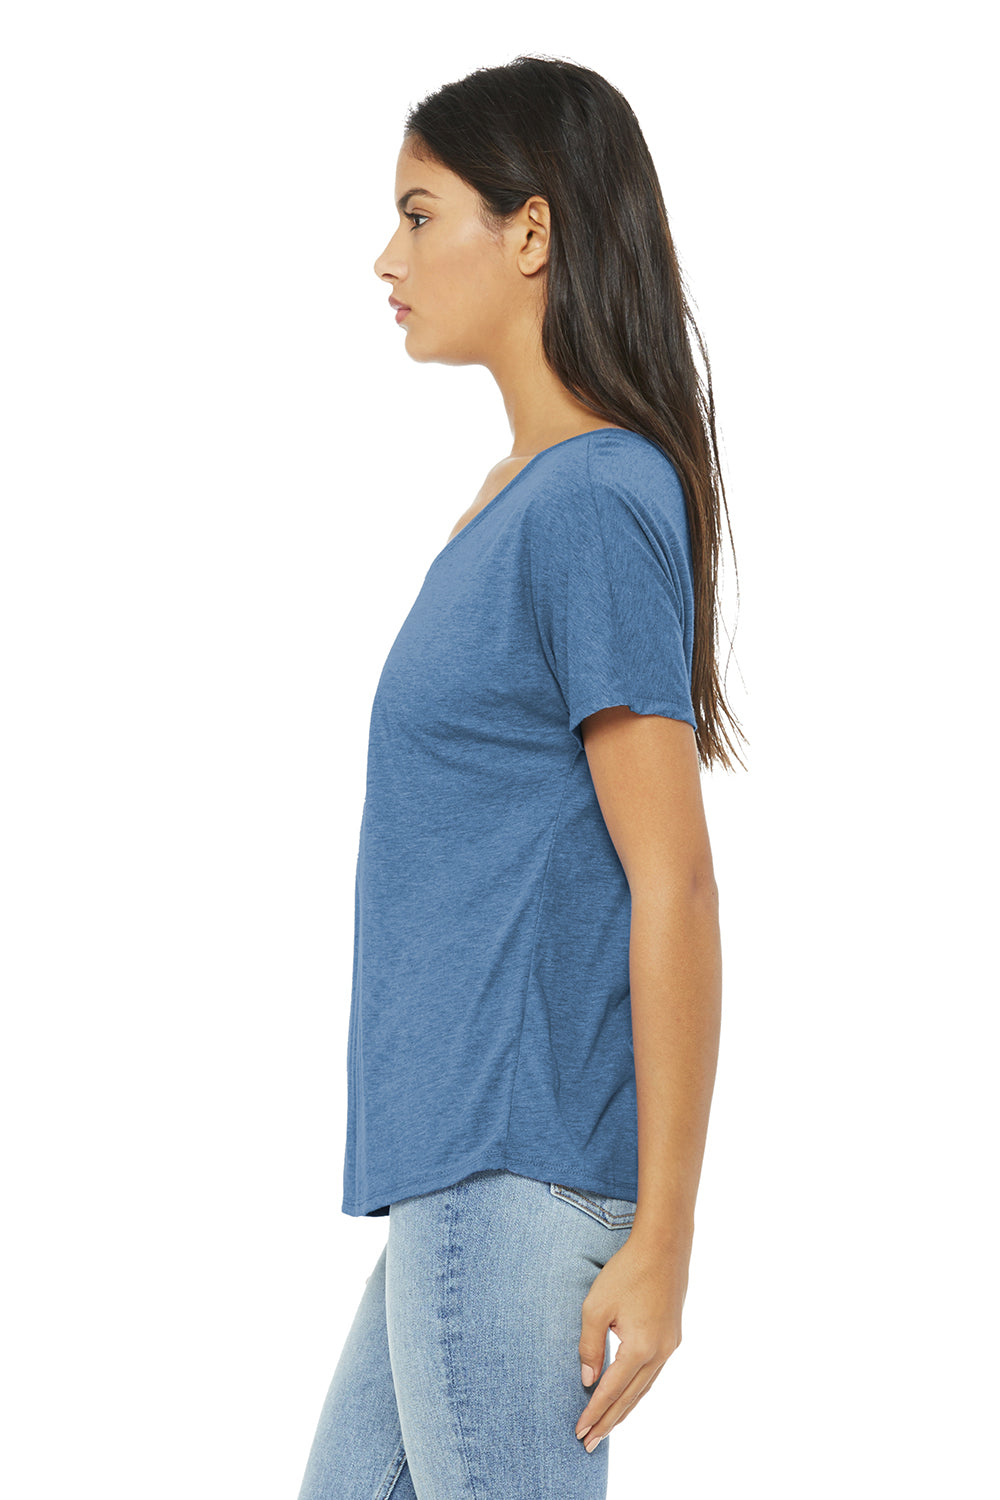 Bella + Canvas BC8816/8816 Womens Slouchy Short Sleeve Wide Neck T-Shirt Blue Triblend Model Side